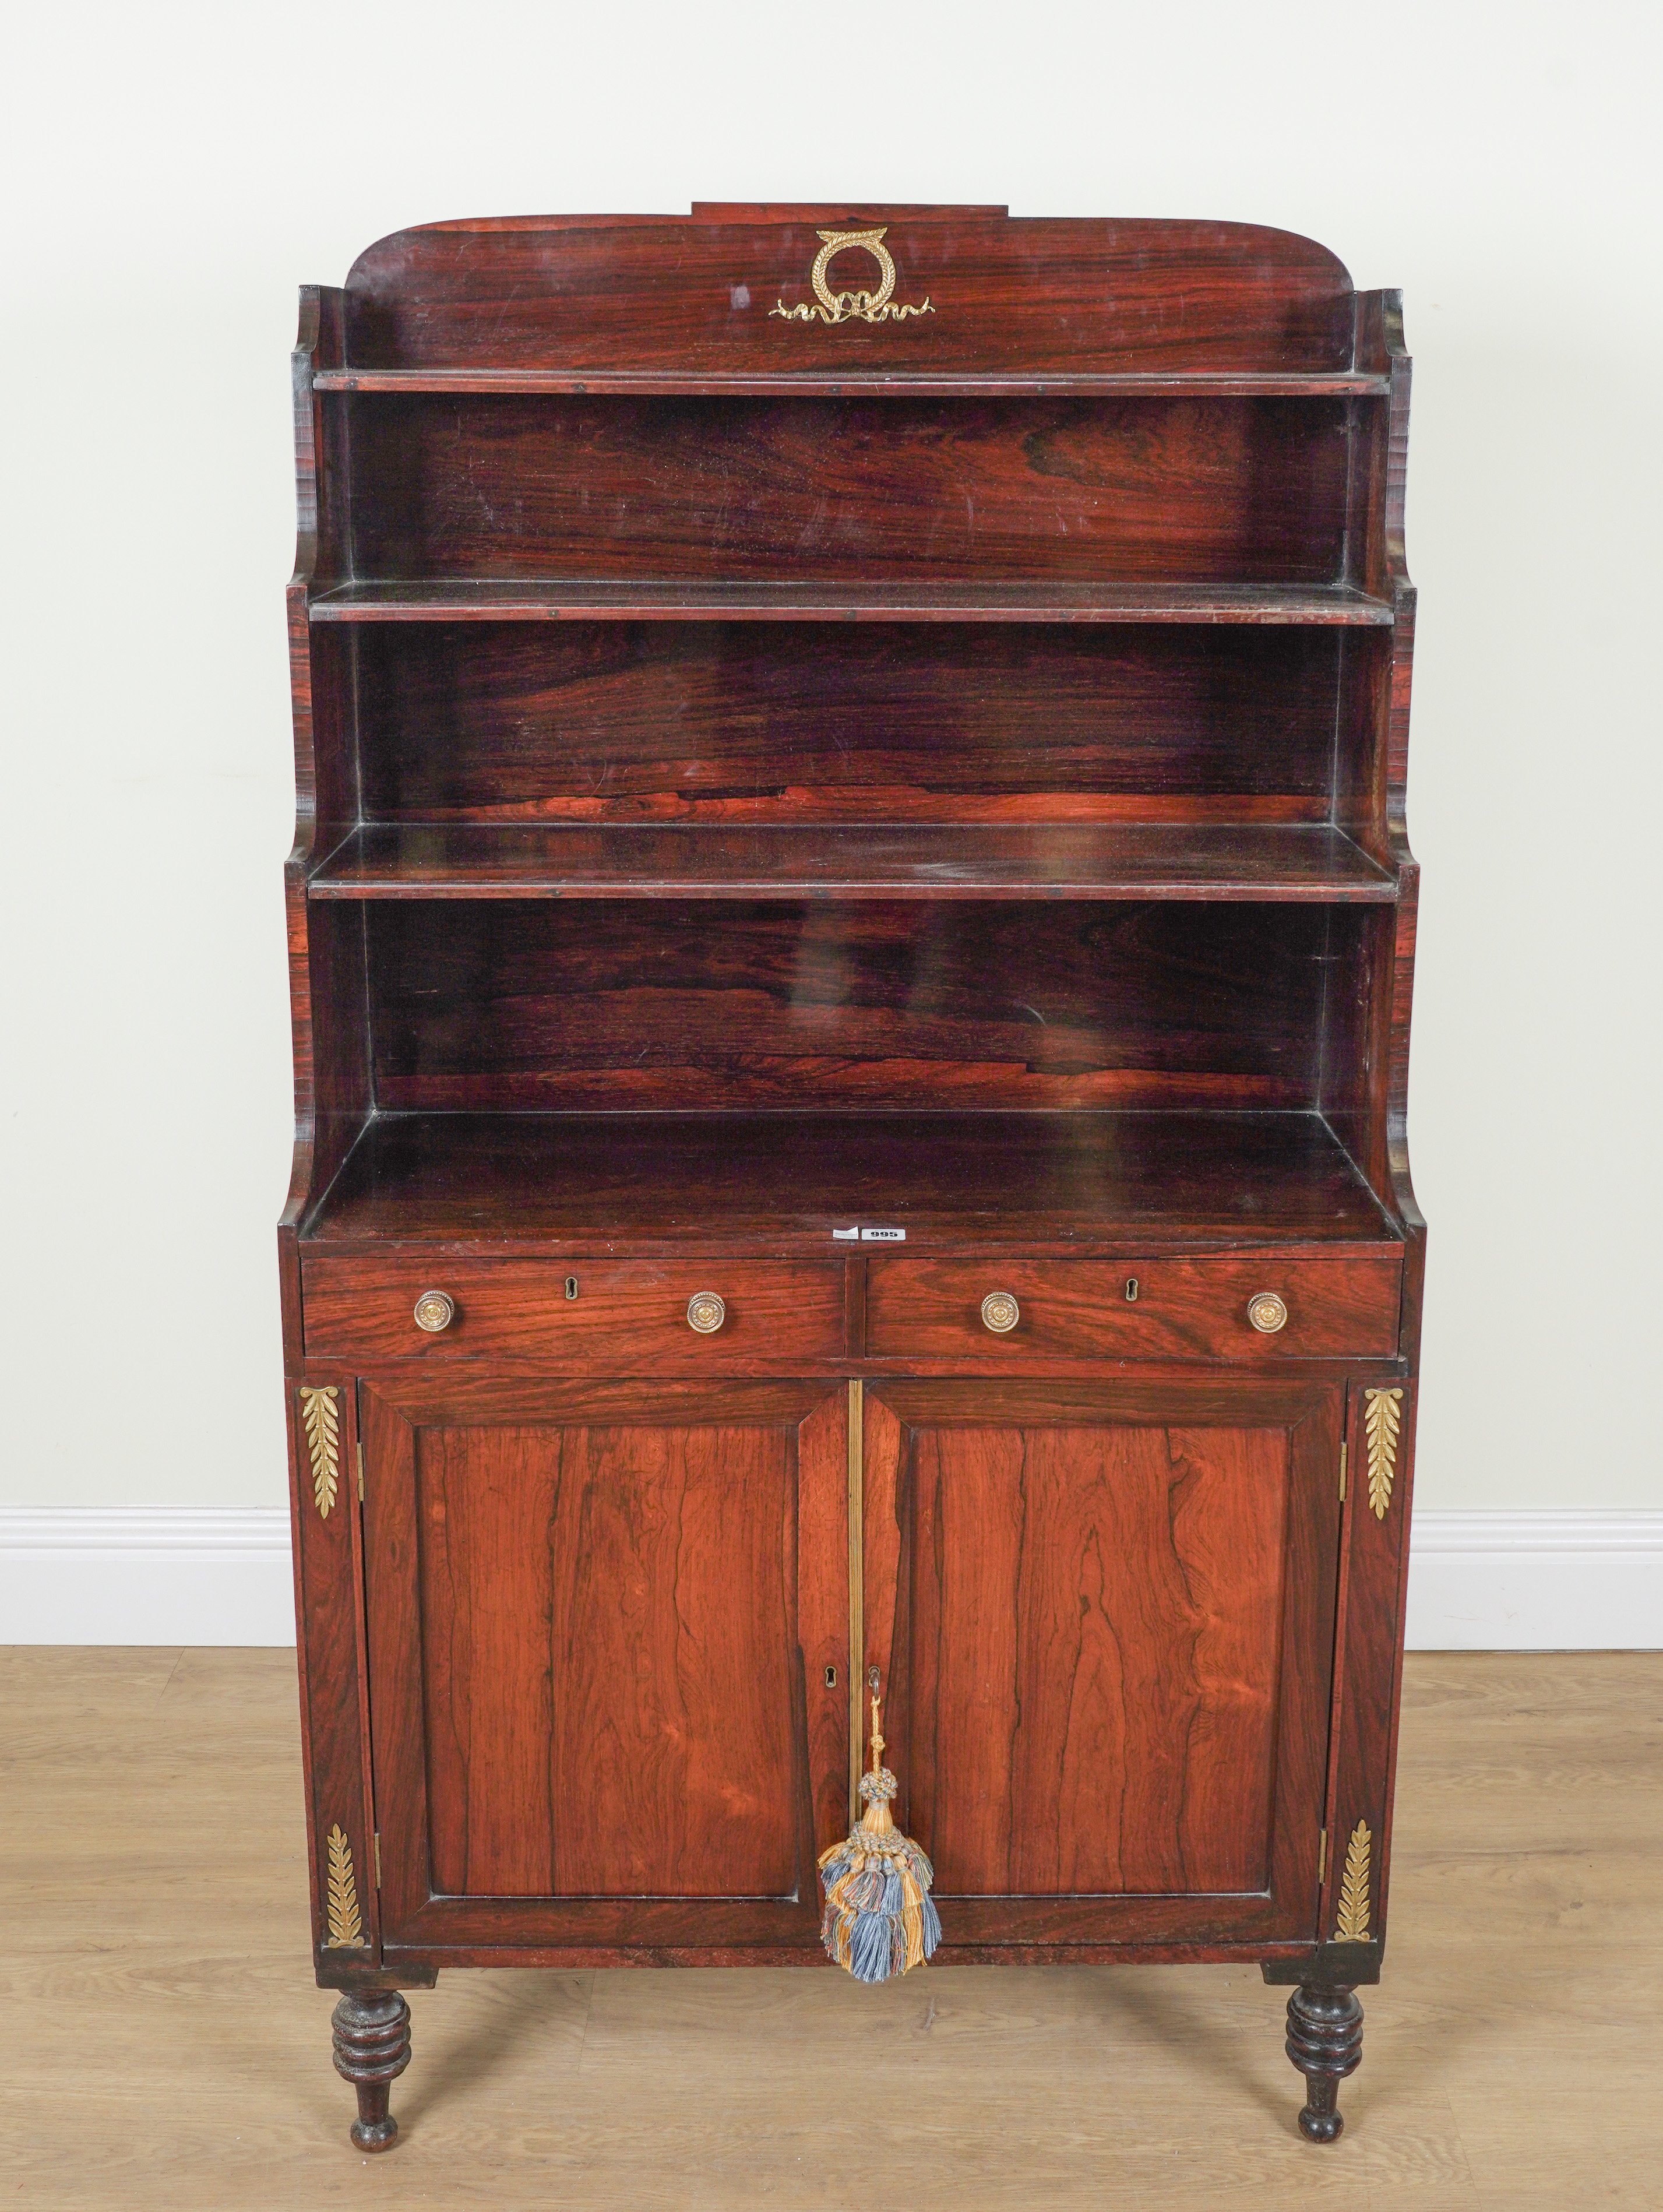 A REGENCY ROSEWOOD WATERFALL BOOKCASE - Image 2 of 4